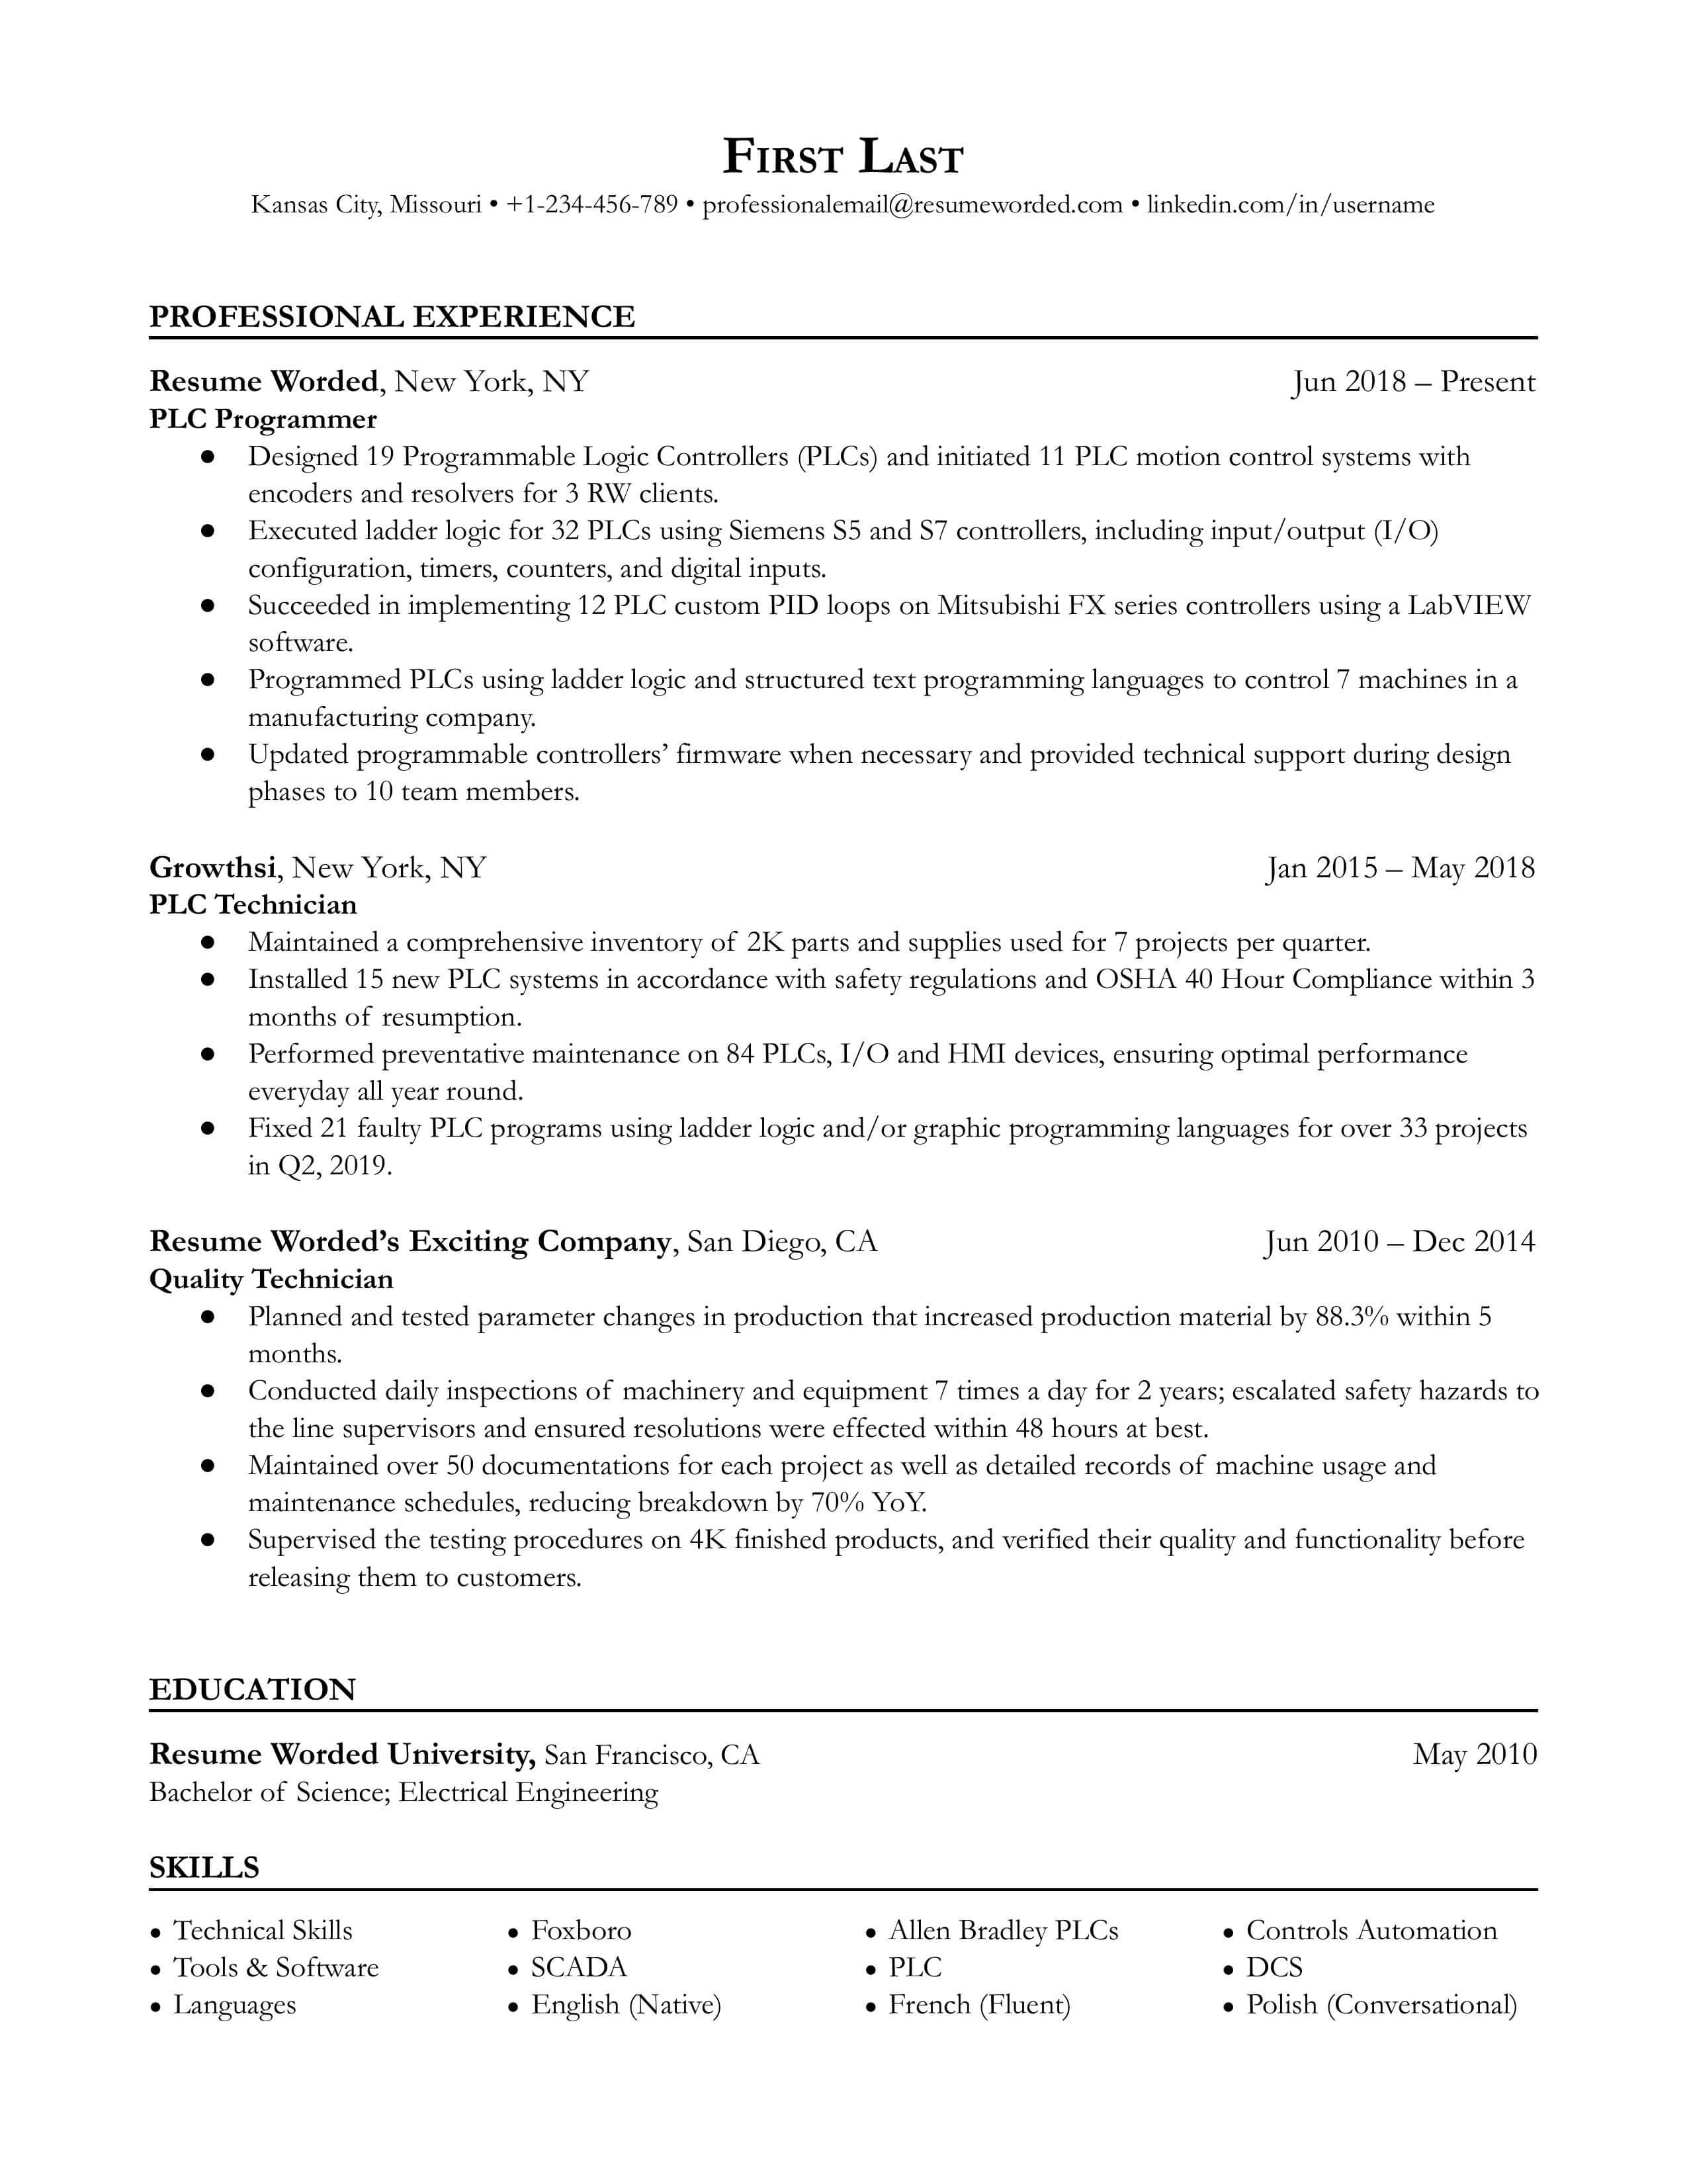 A PLC Programmer resume template that emphasizes work experience and includes an education and skills section